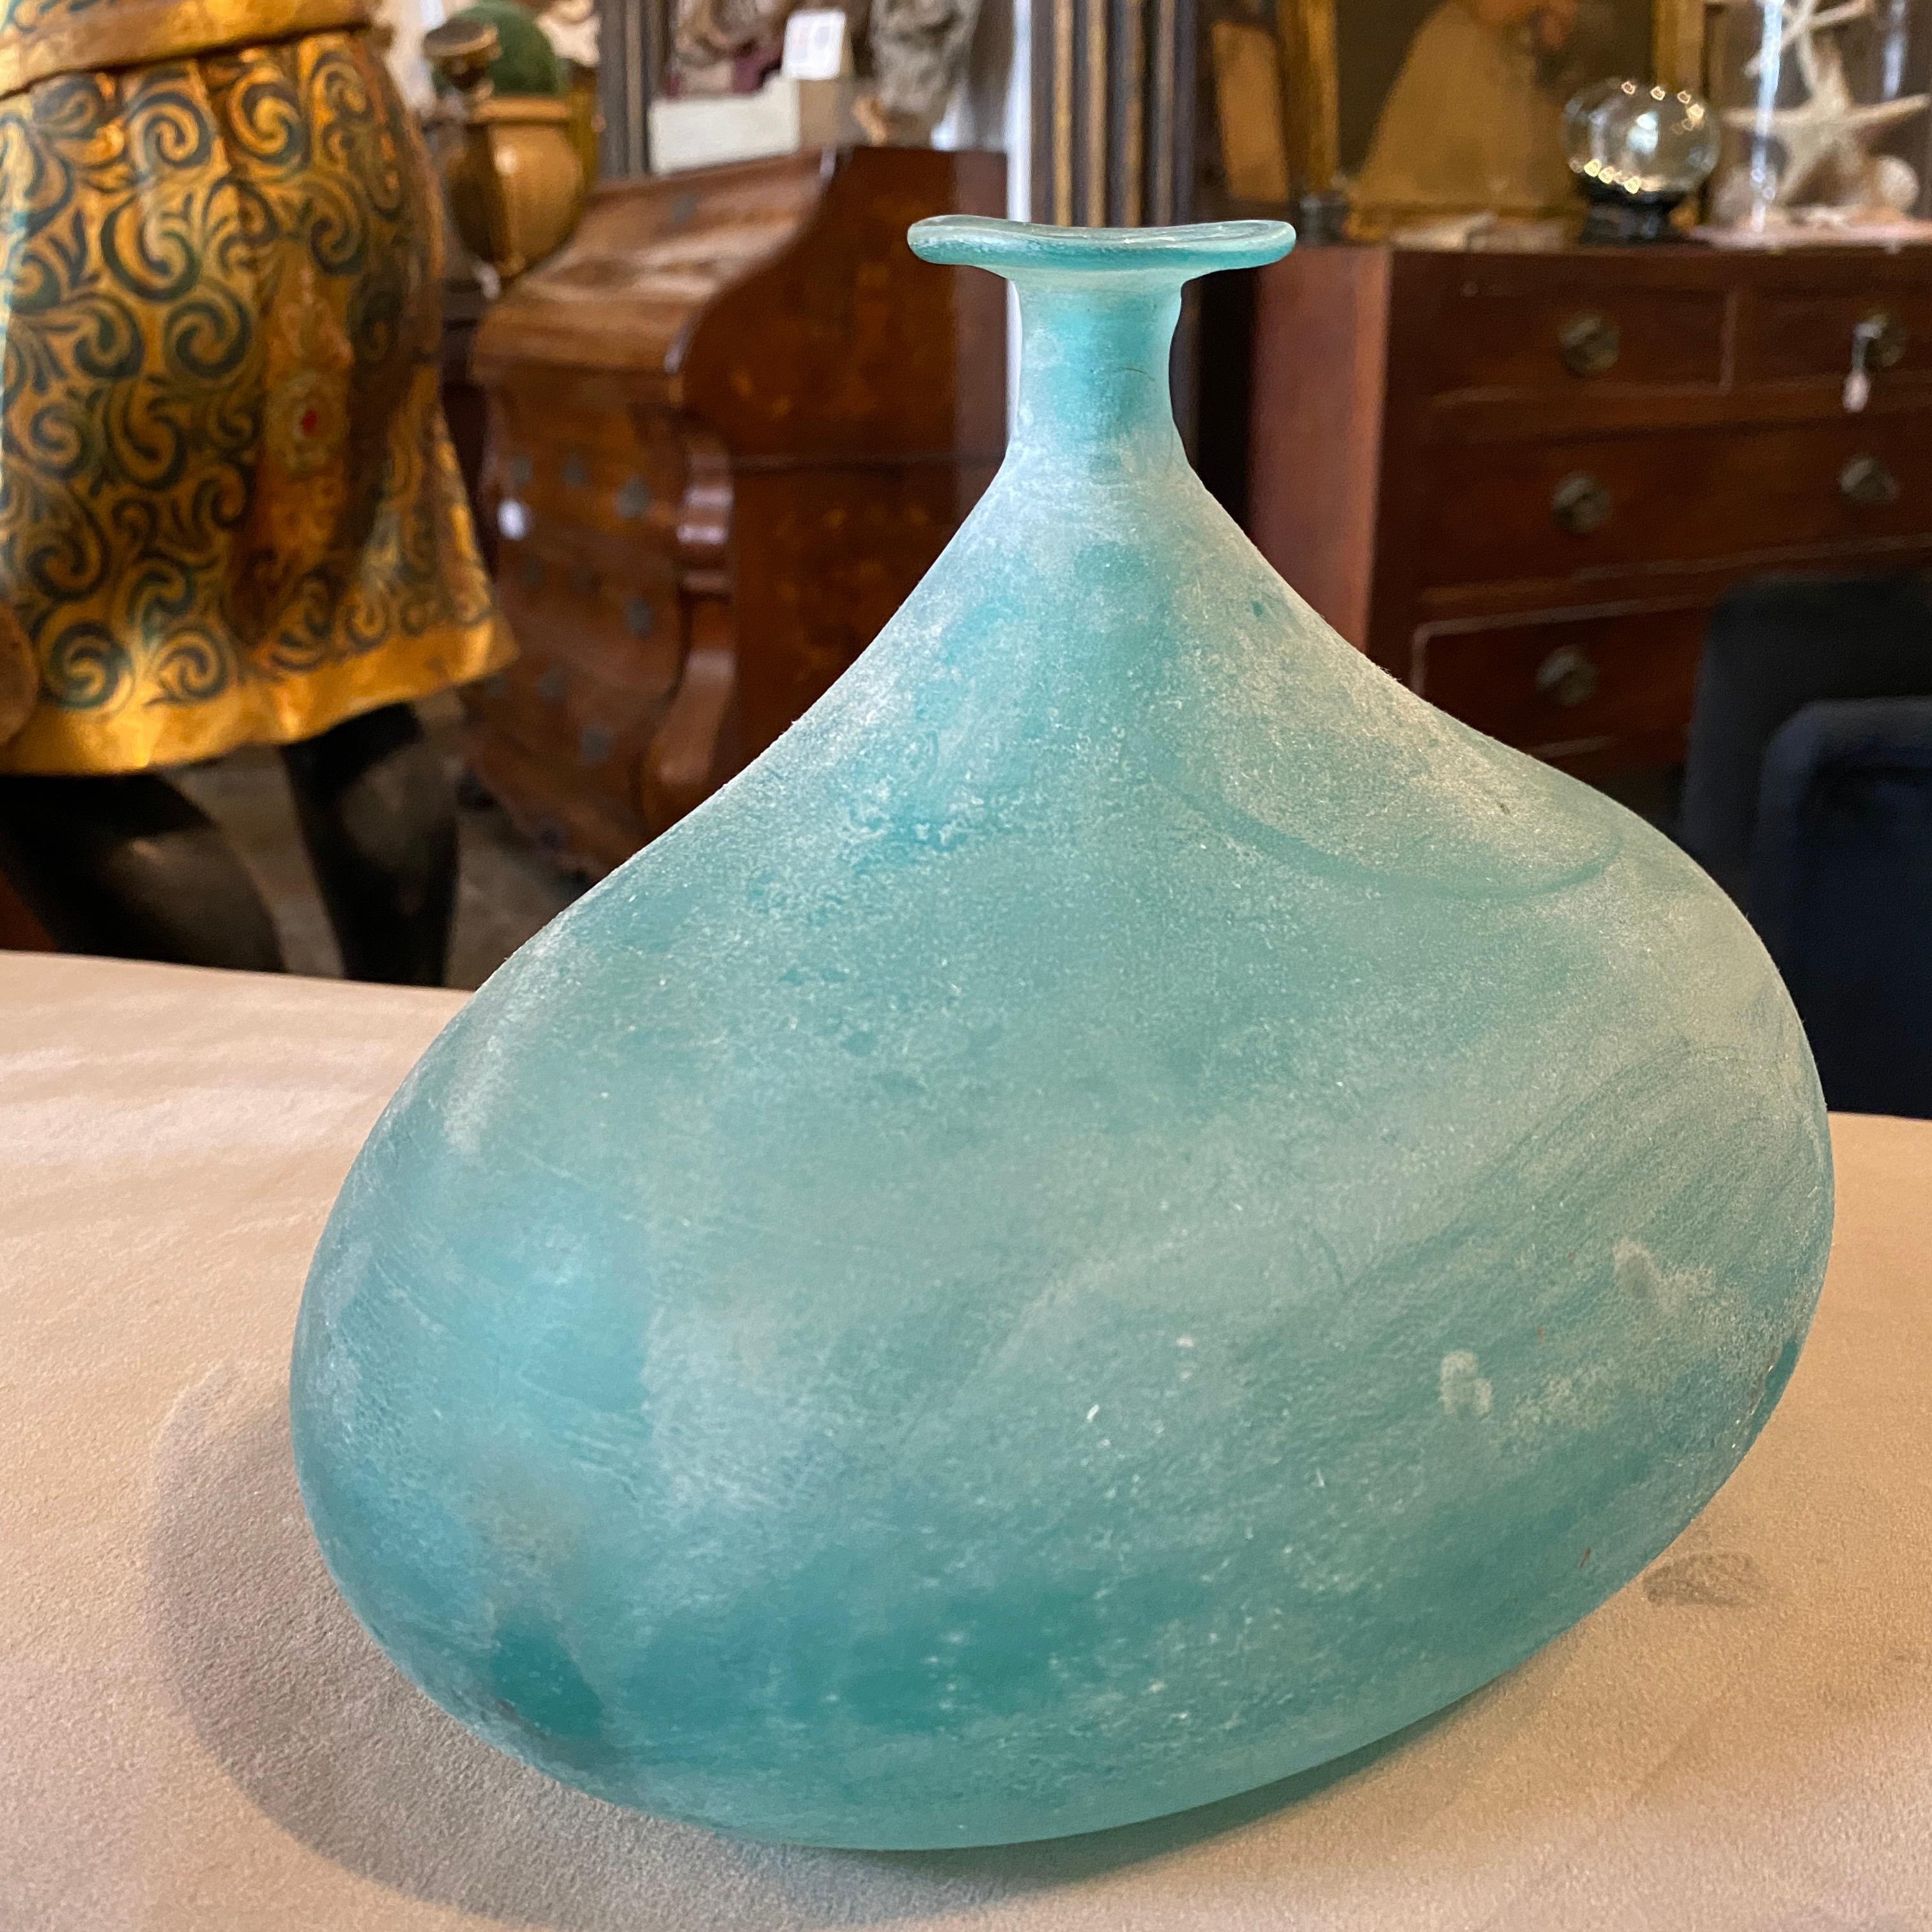 Amazing hand-crafted blue vase made in Murano by Cenedese, it's signed and labeled on the bottom. It's a very particular blue vase for its irregular shape, this type of glass is named 